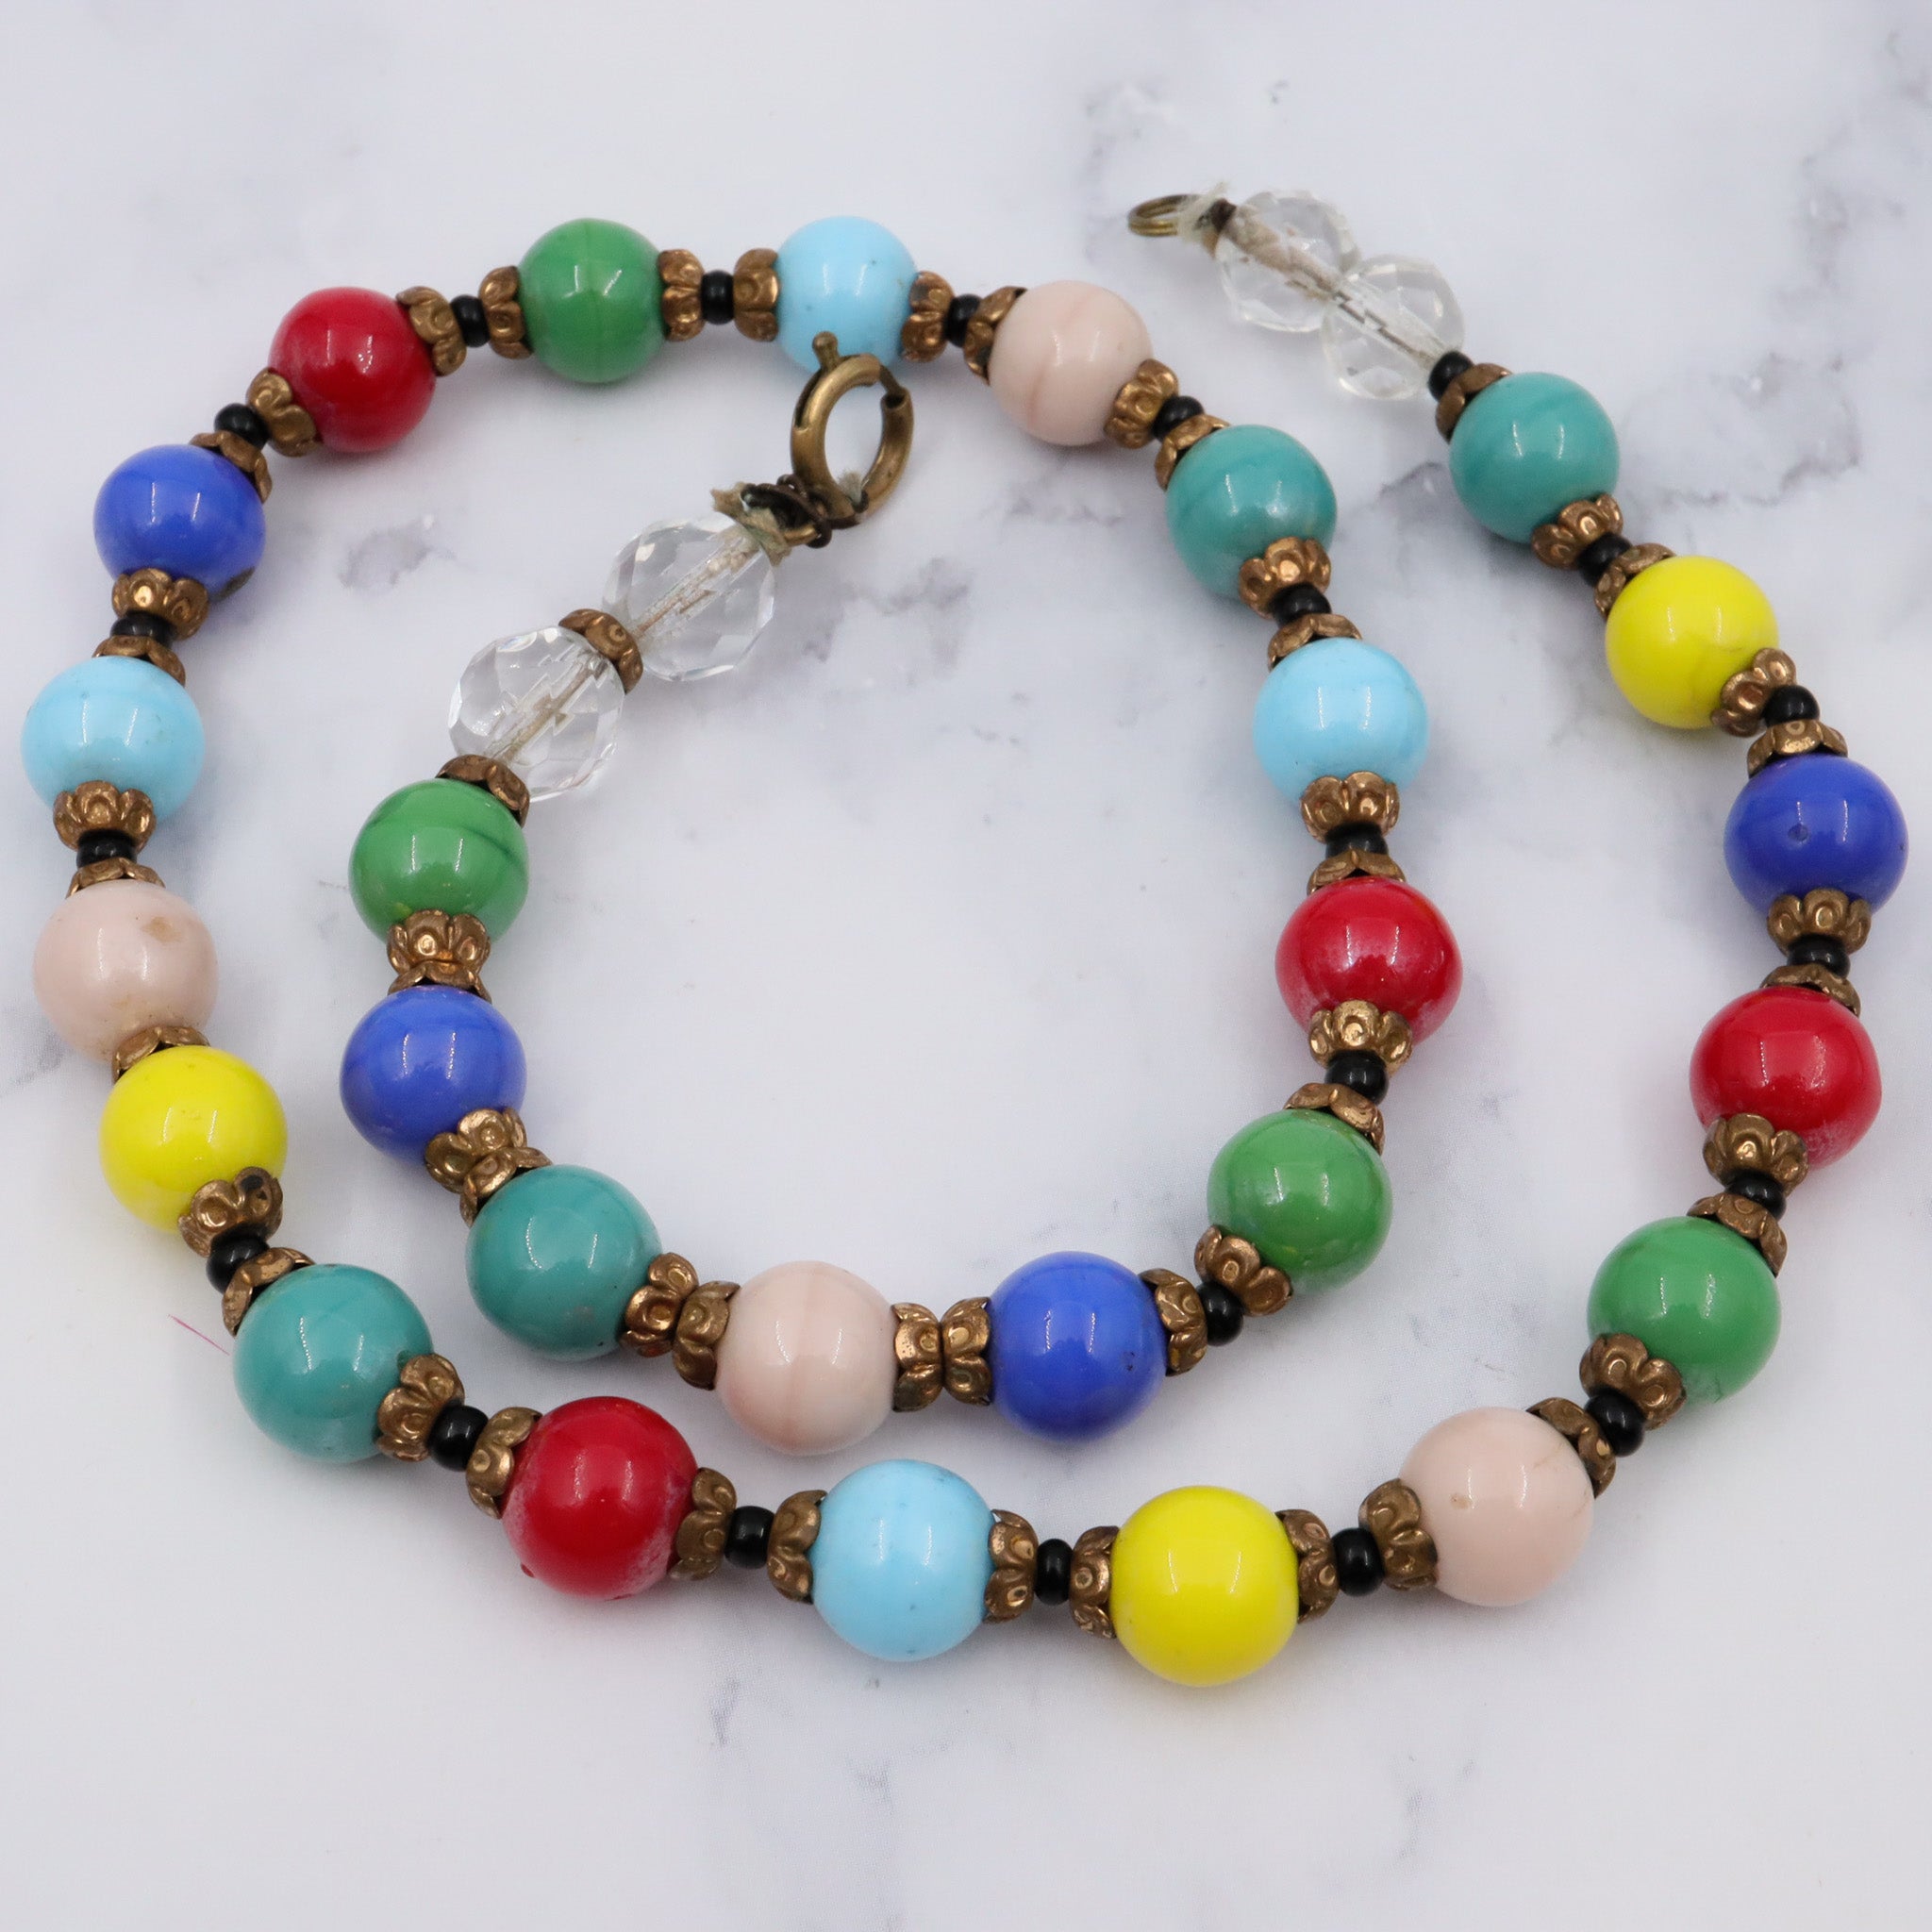 Antique rainbow glass beaded necklace with brass spacers, 16.5